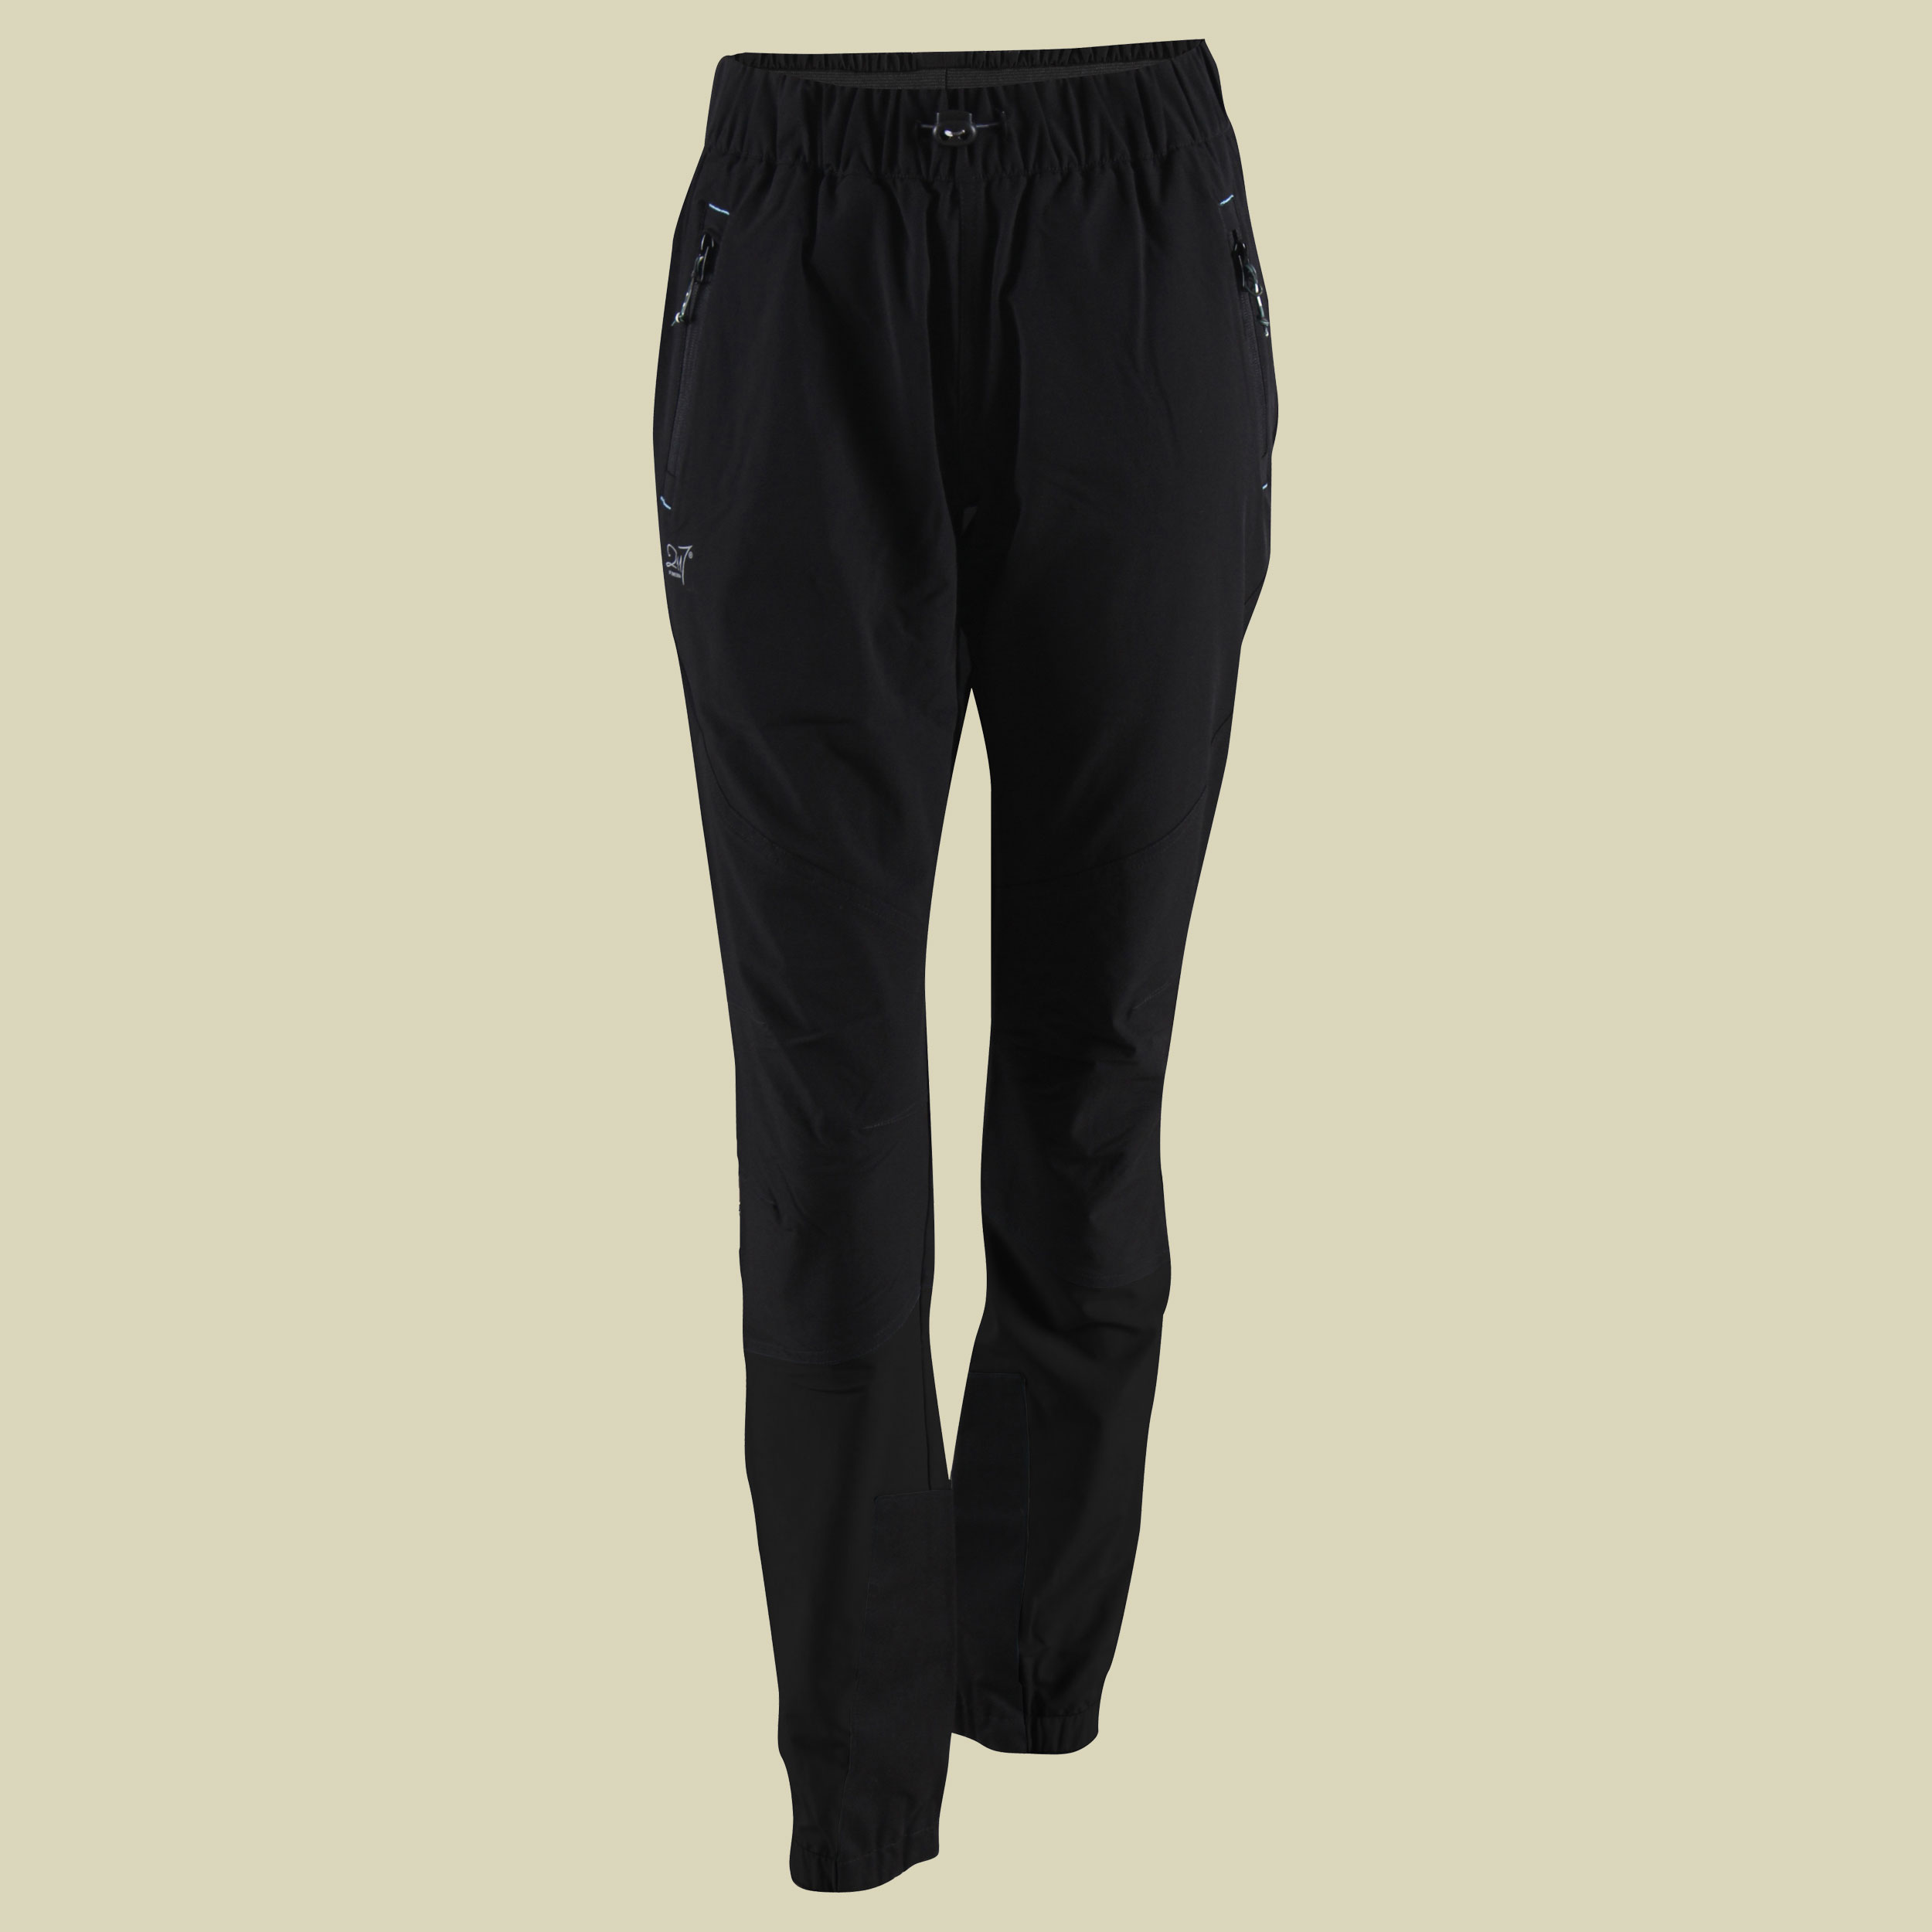 Eco Outdoor Pants SIL Women Größe 36 Farbe black solid